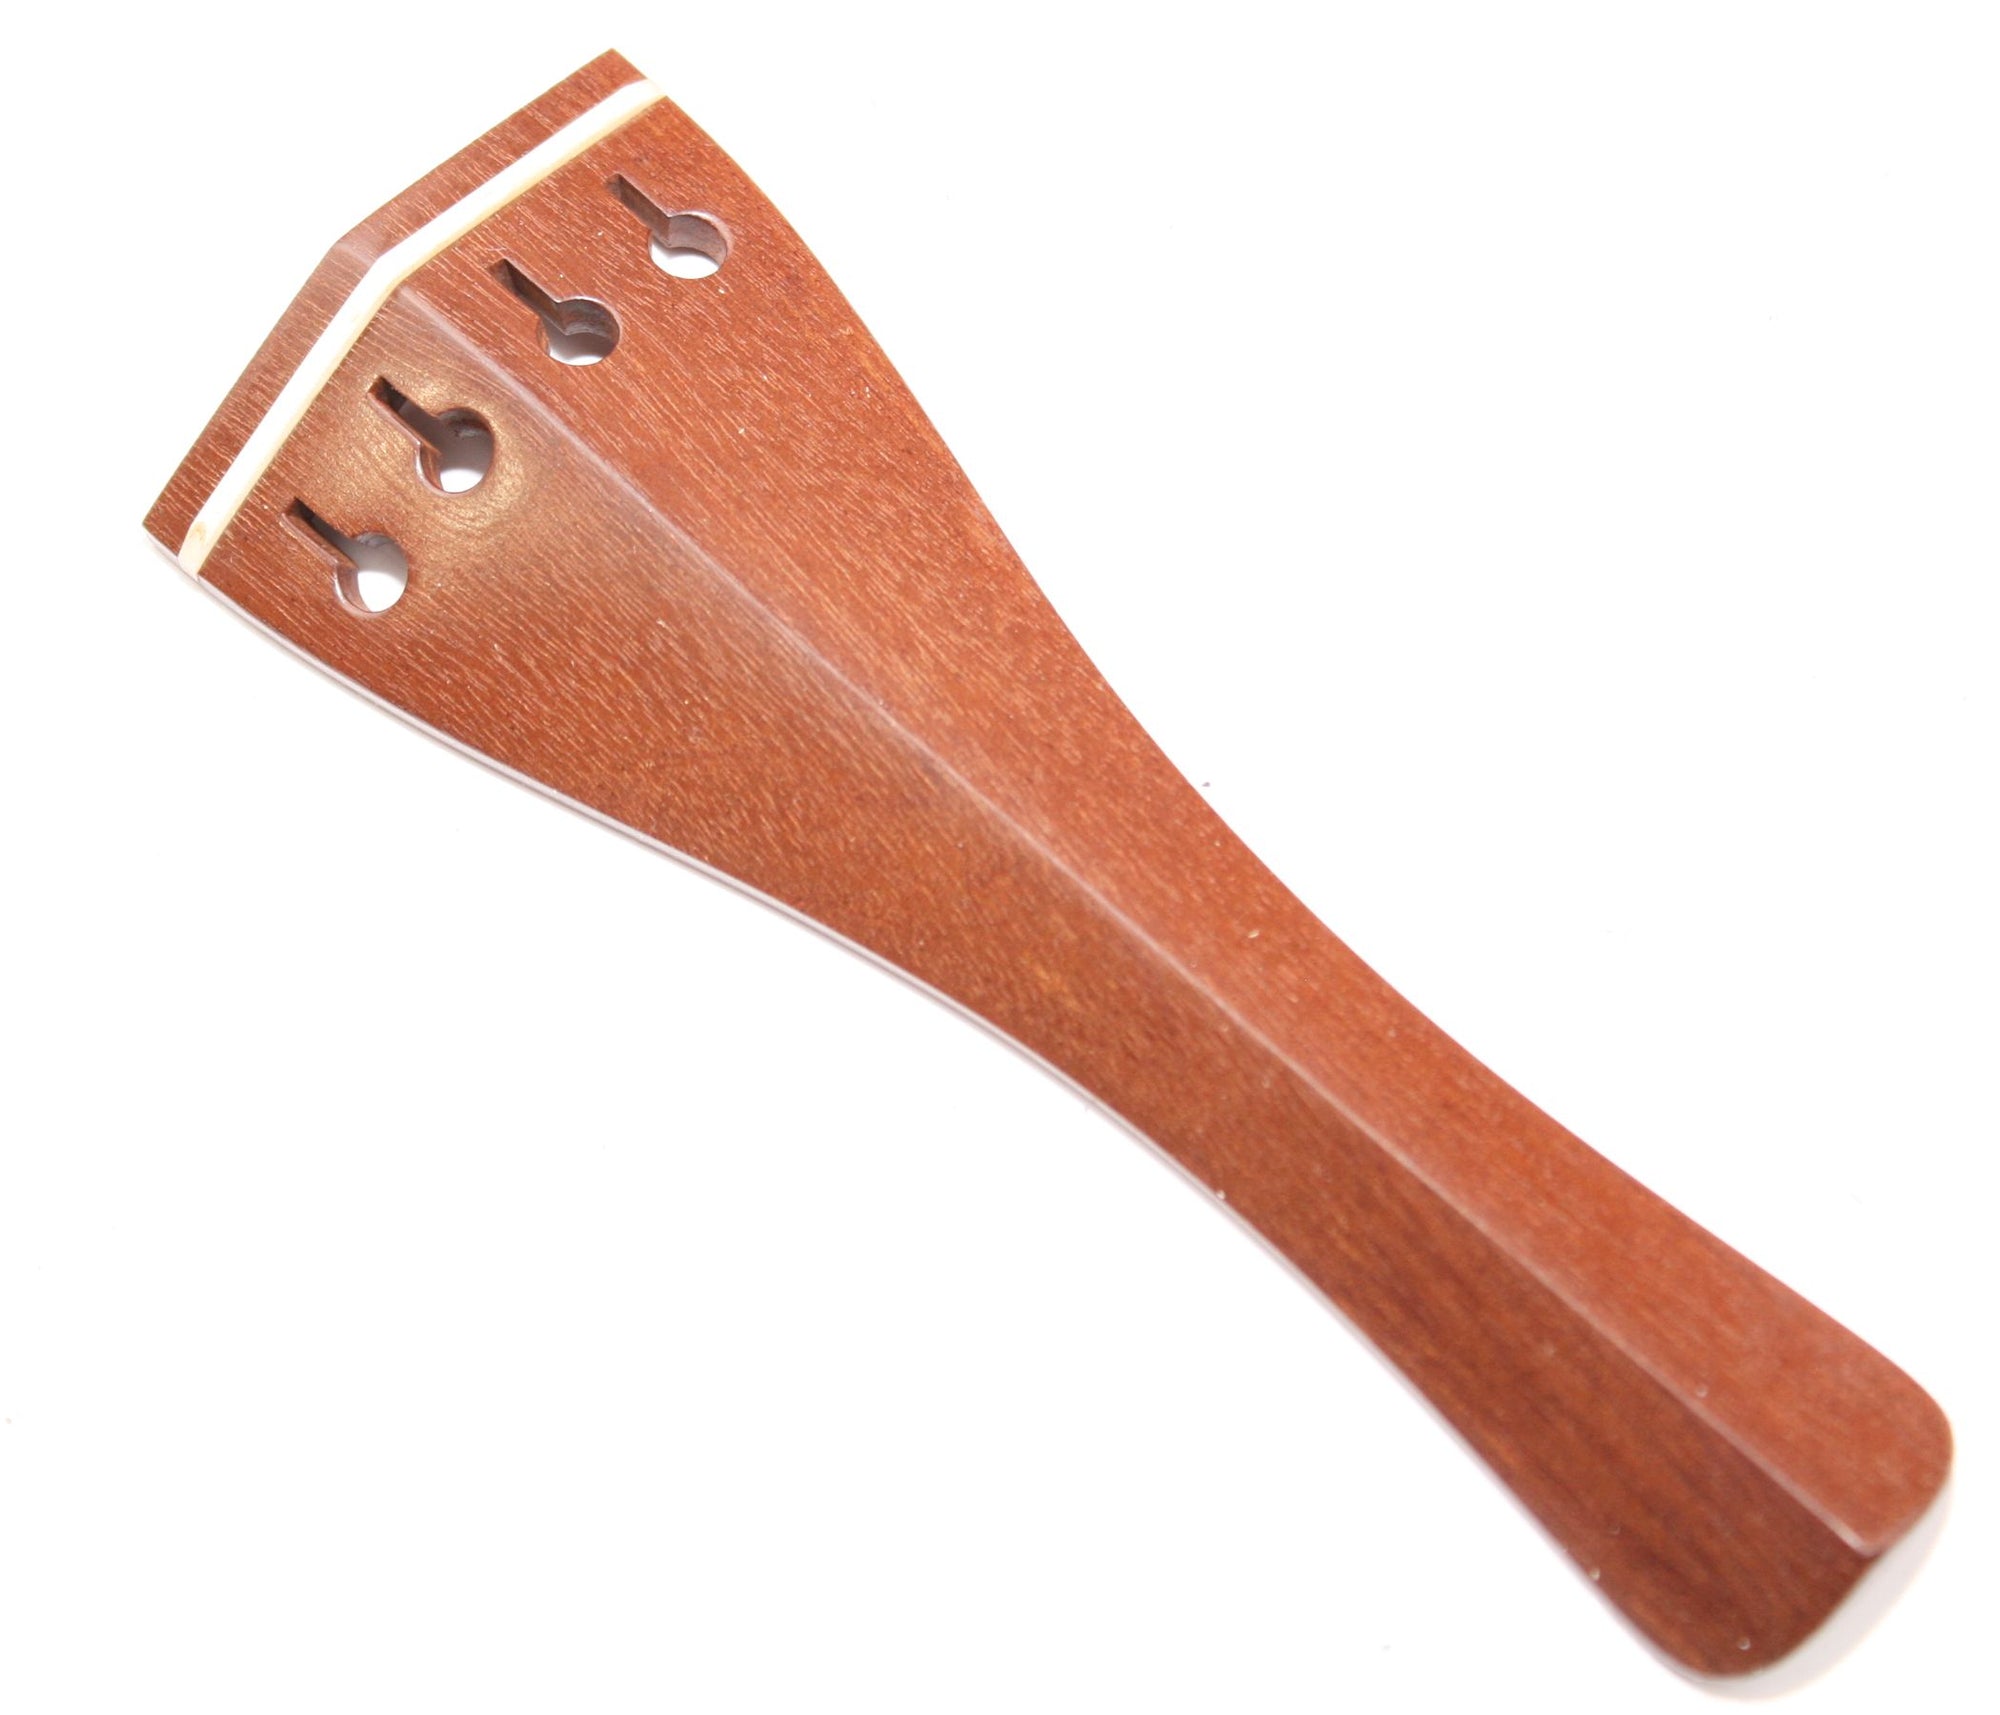 Viola tailpiece-Hill-Crabwood-white saddle